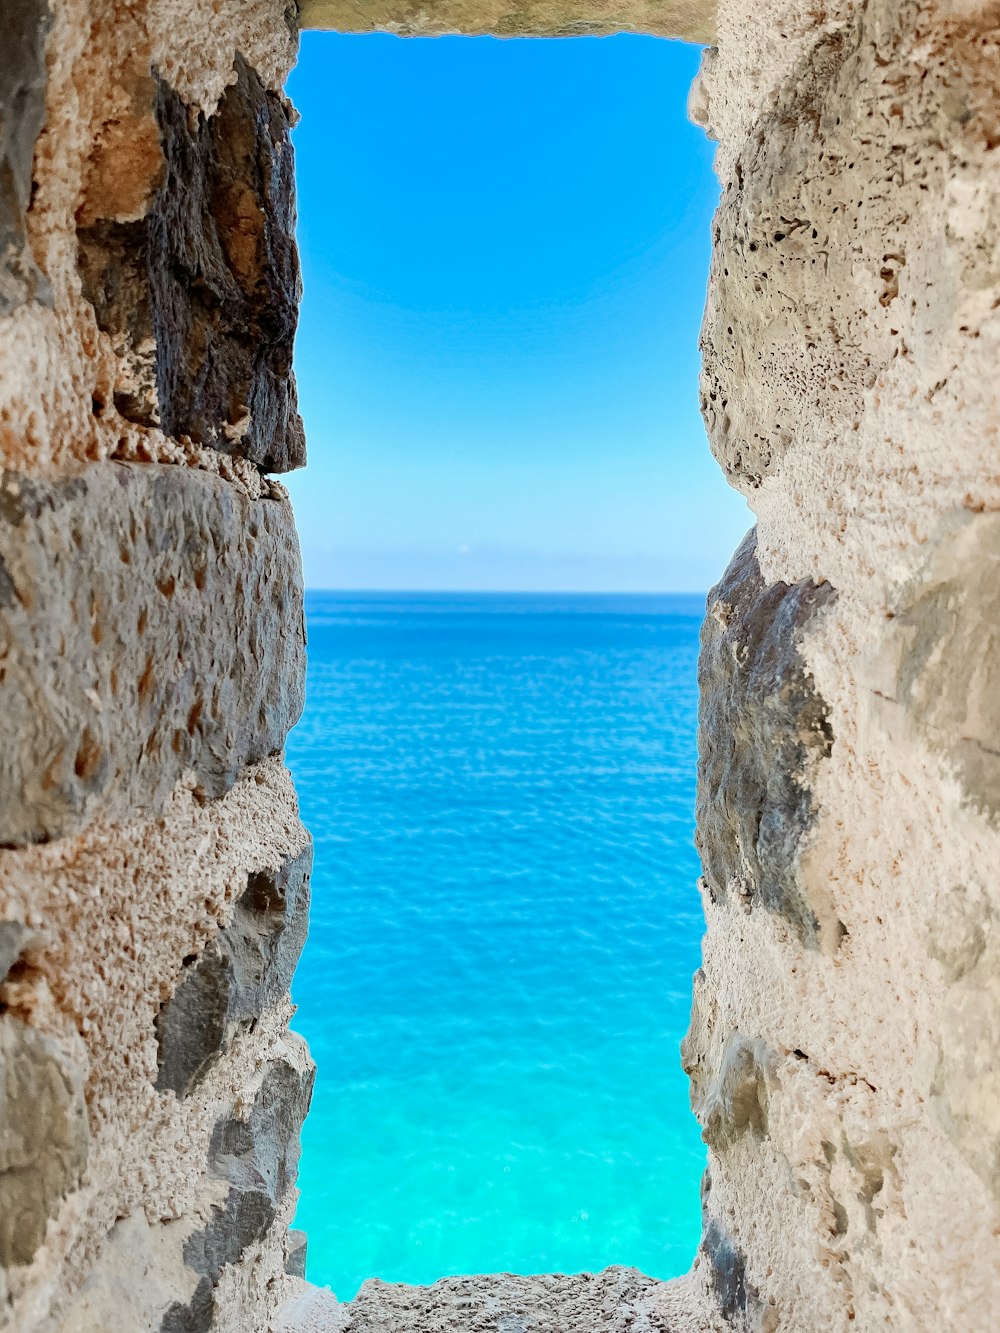 a view of the ocean through a stone window